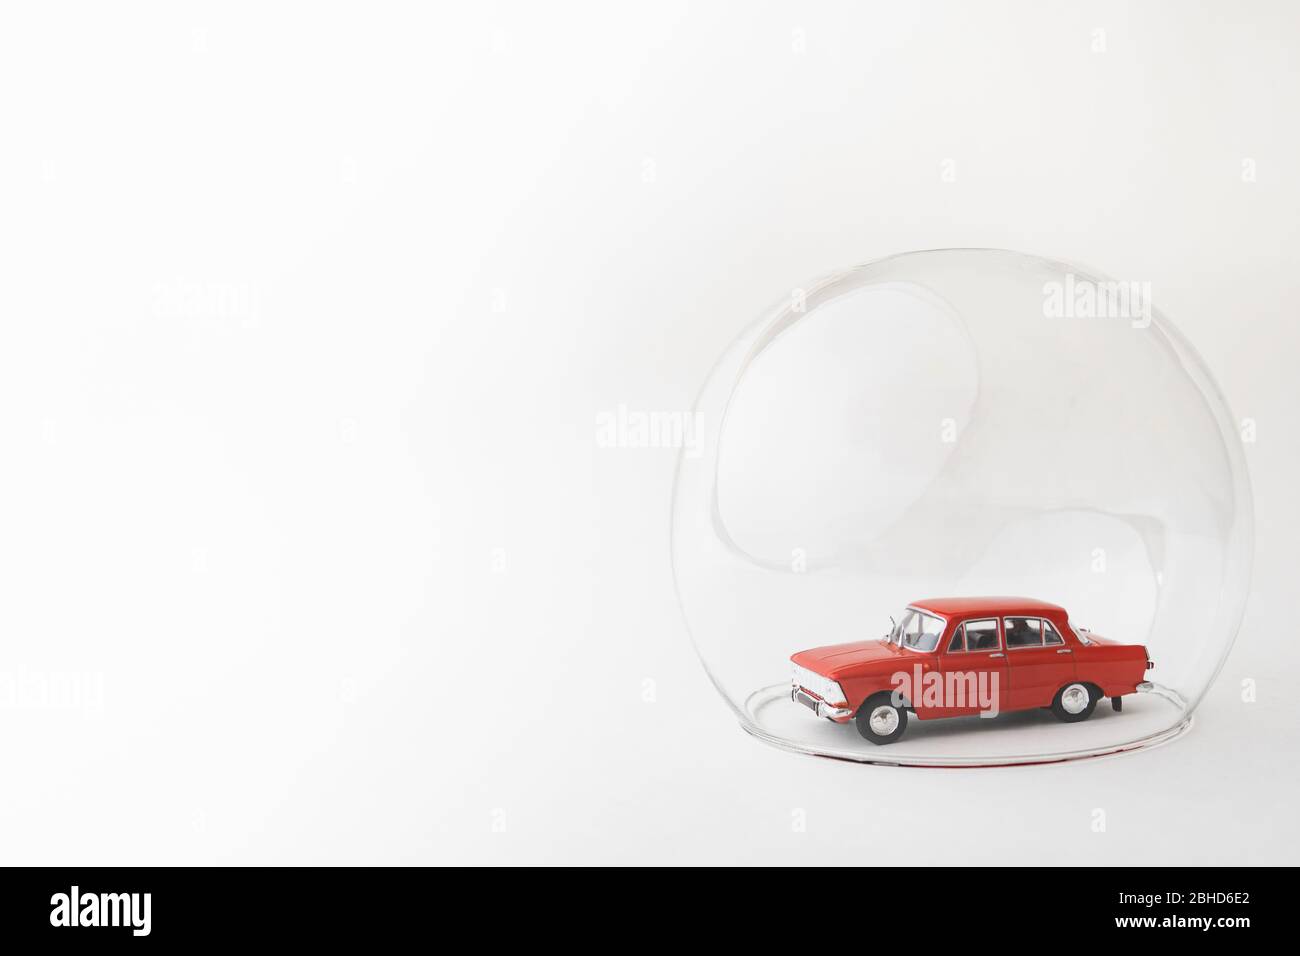 Red toy car inside a glass ball. Conceptual image of insurance coverage and safety protection. Stock Photo